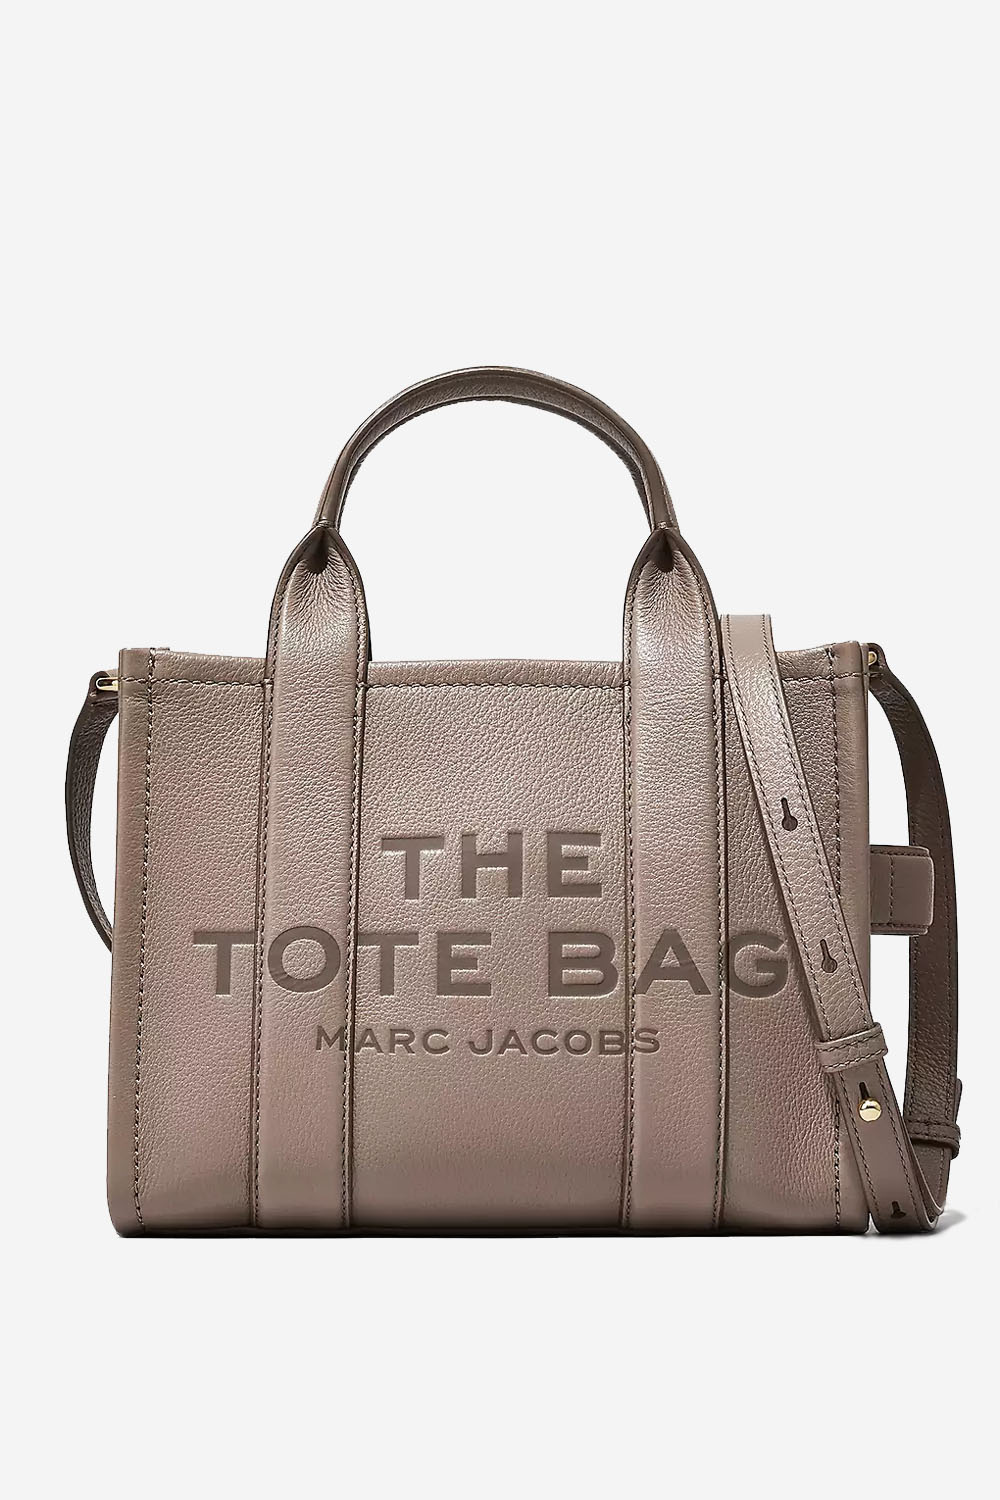 Marc Jacobs Tote bag Taupe